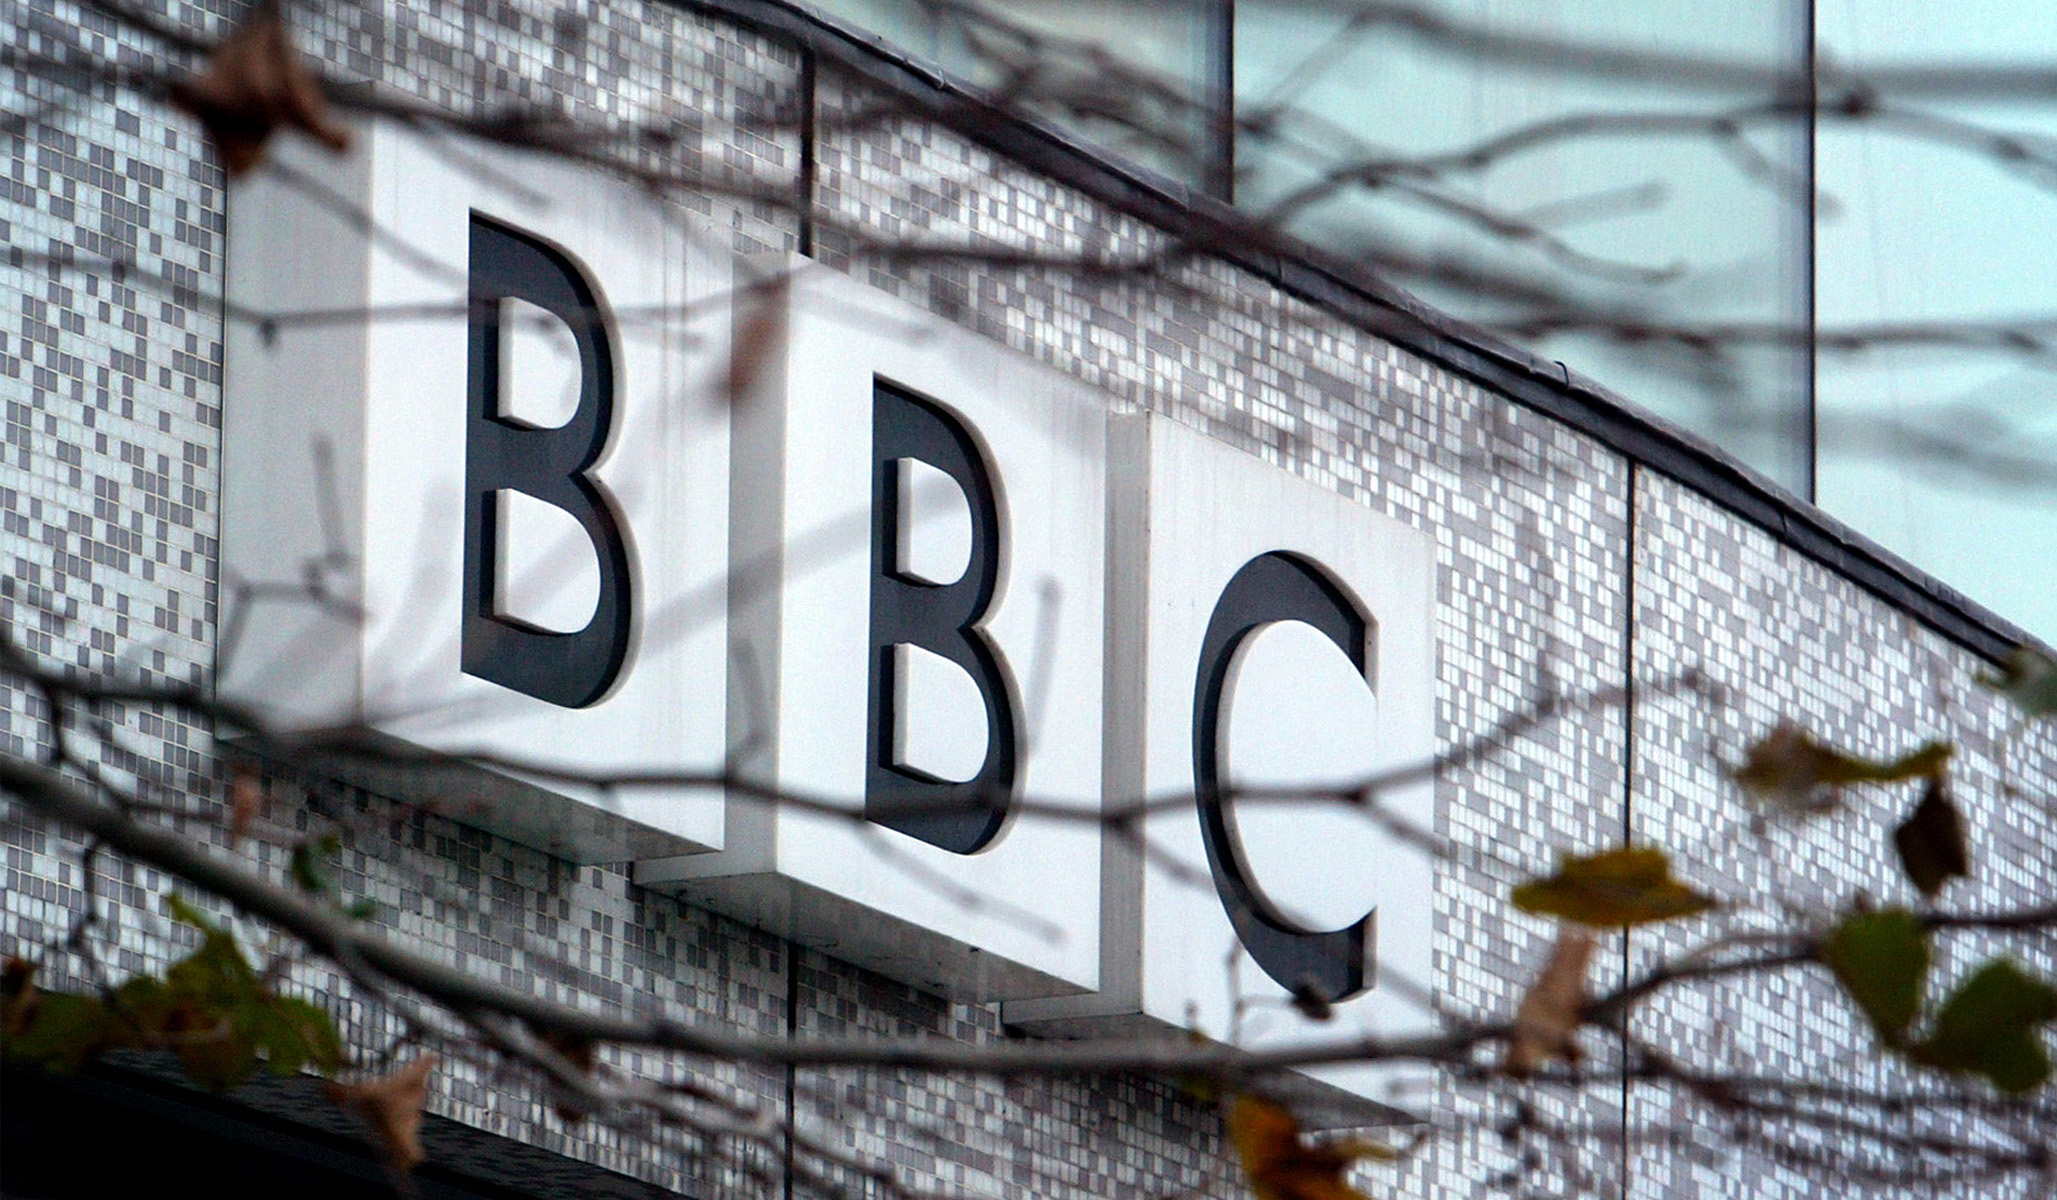 The BBC Quietly Censors Its Own Archives